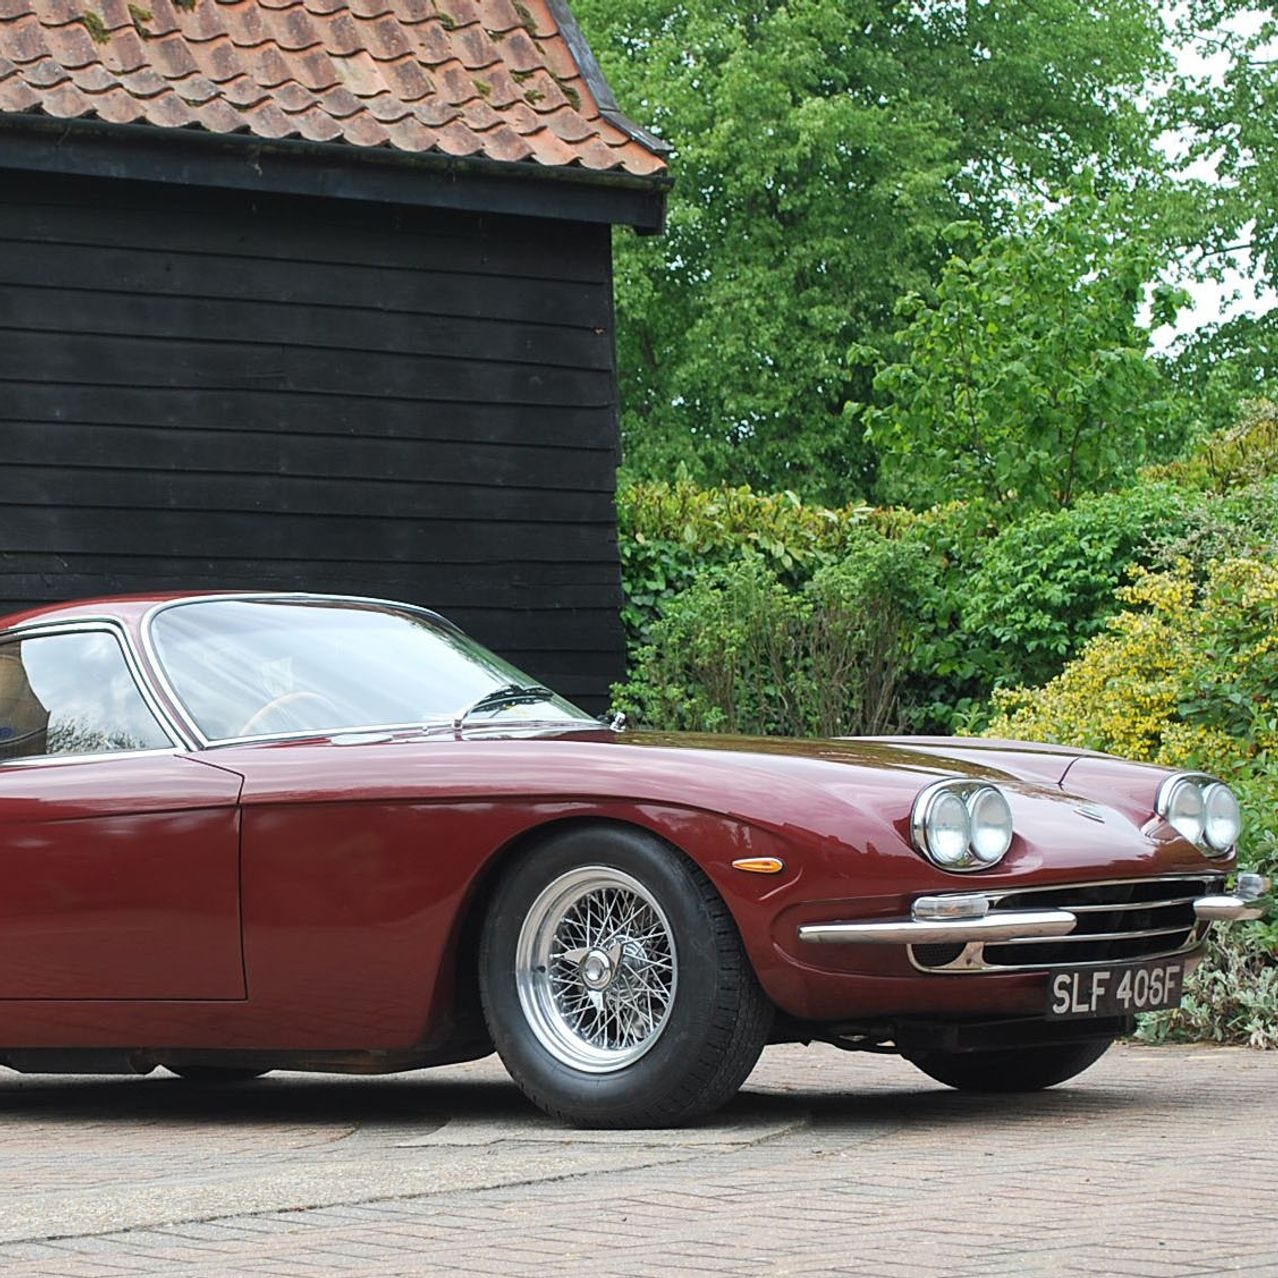 The Lamborghini 400 GT 2+2 driven by former Beatle Paul McCartney in the 1960s.